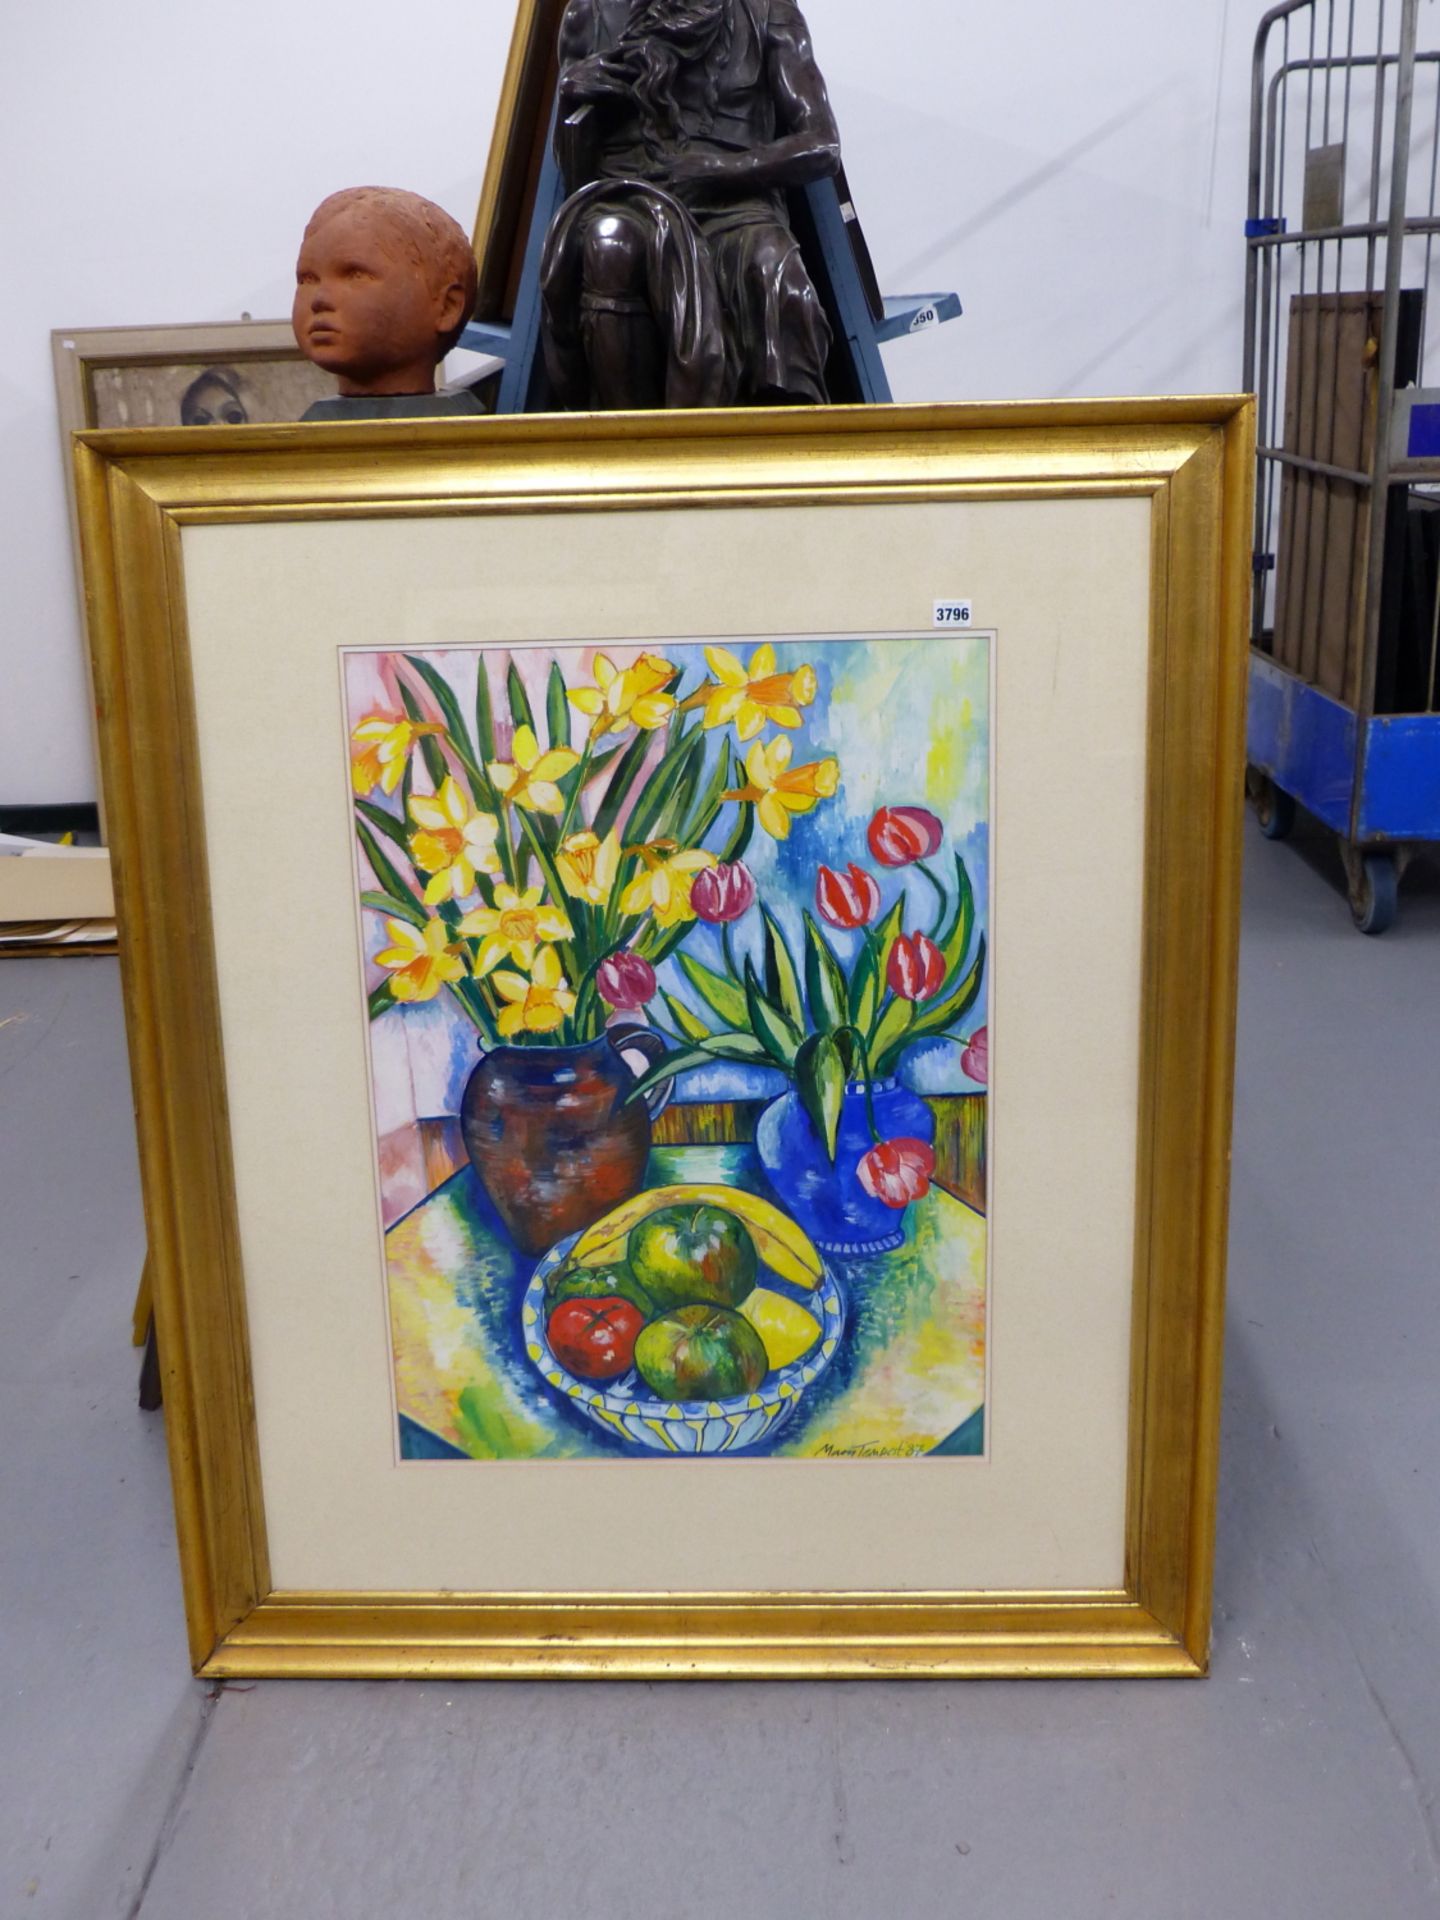 MARY TEMPEST (20TH CENTURY) DAFFODILS AND TULIPS. WATERCOLOUR AND GOUACHE ON PAPER. SIGNED AND DATED - Image 4 of 6